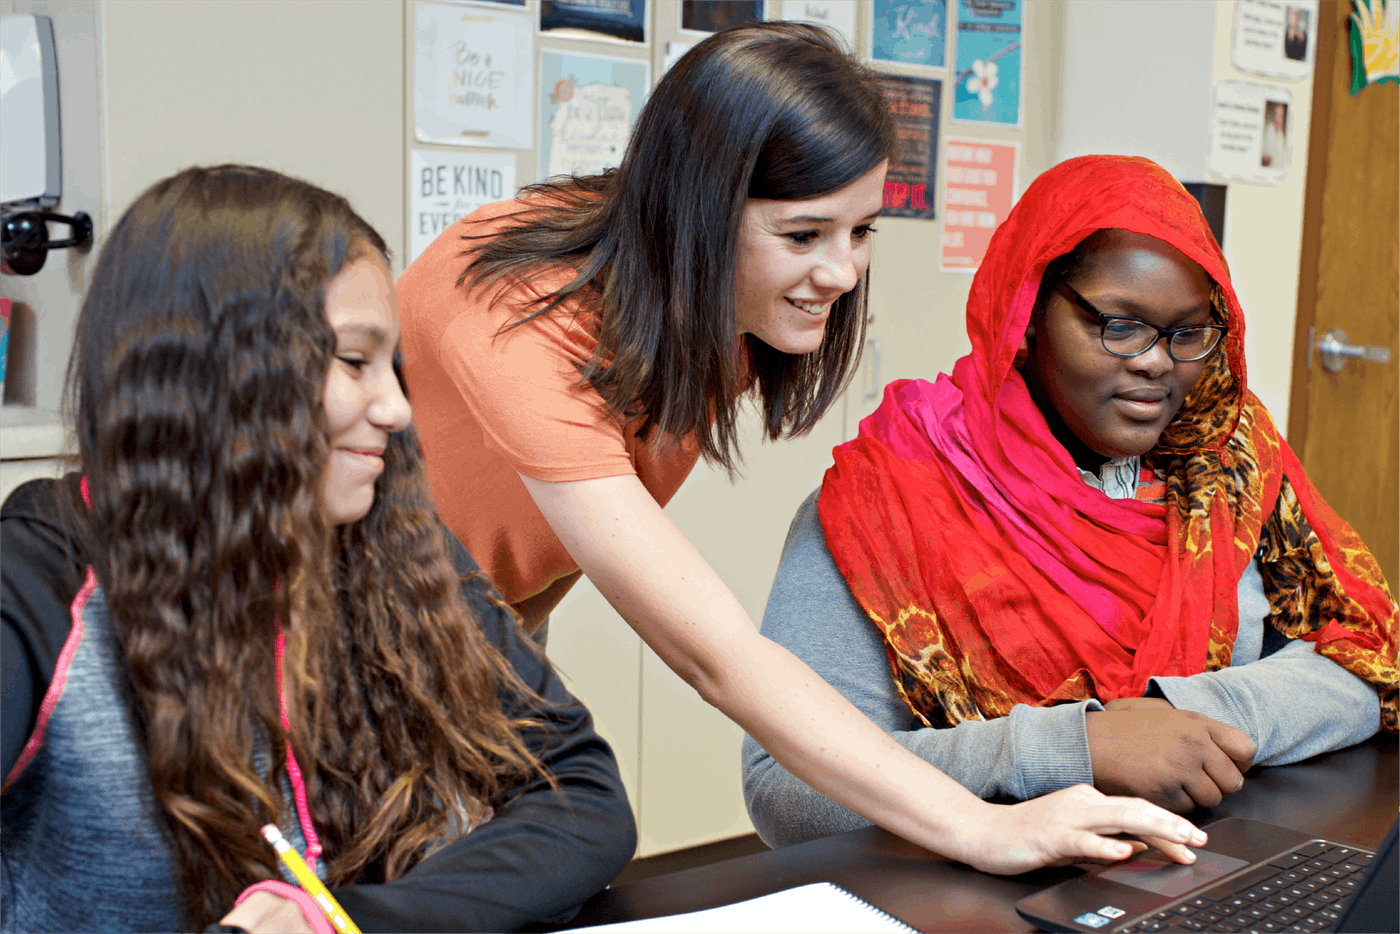 A teacher assists two students with a laptop in a classroom, featuring diverse ethnic backgrounds.